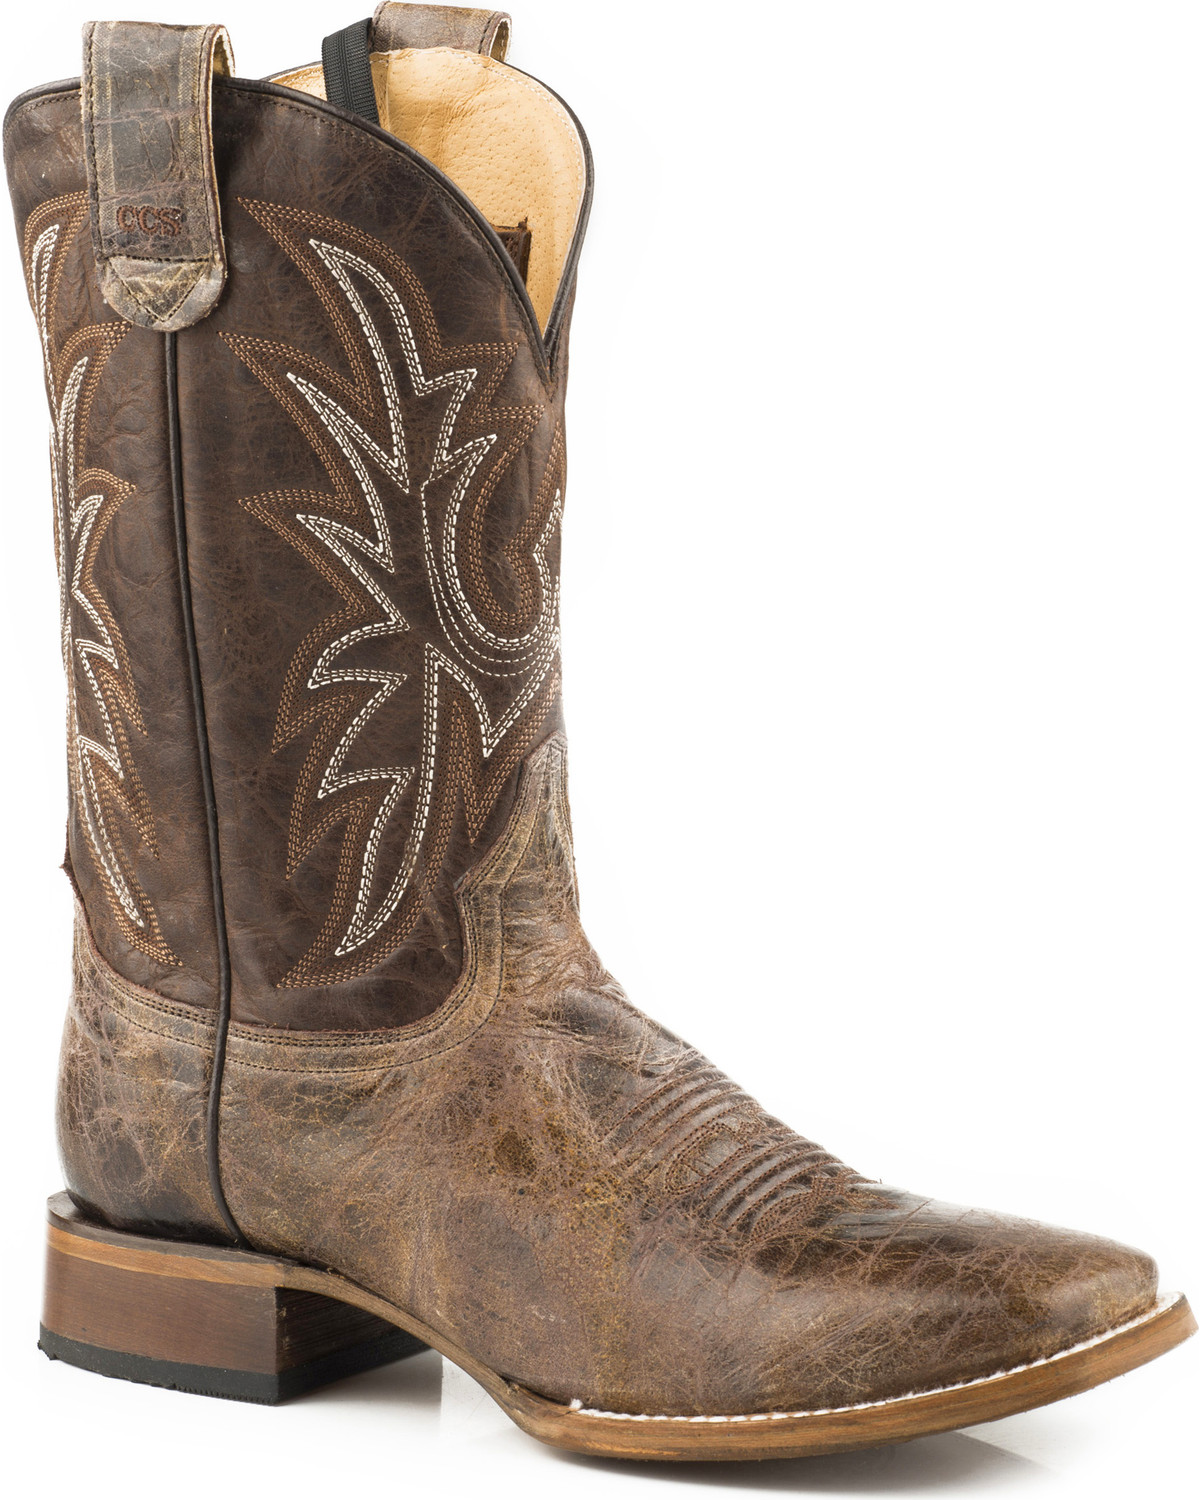 roper concealed carry boots womens